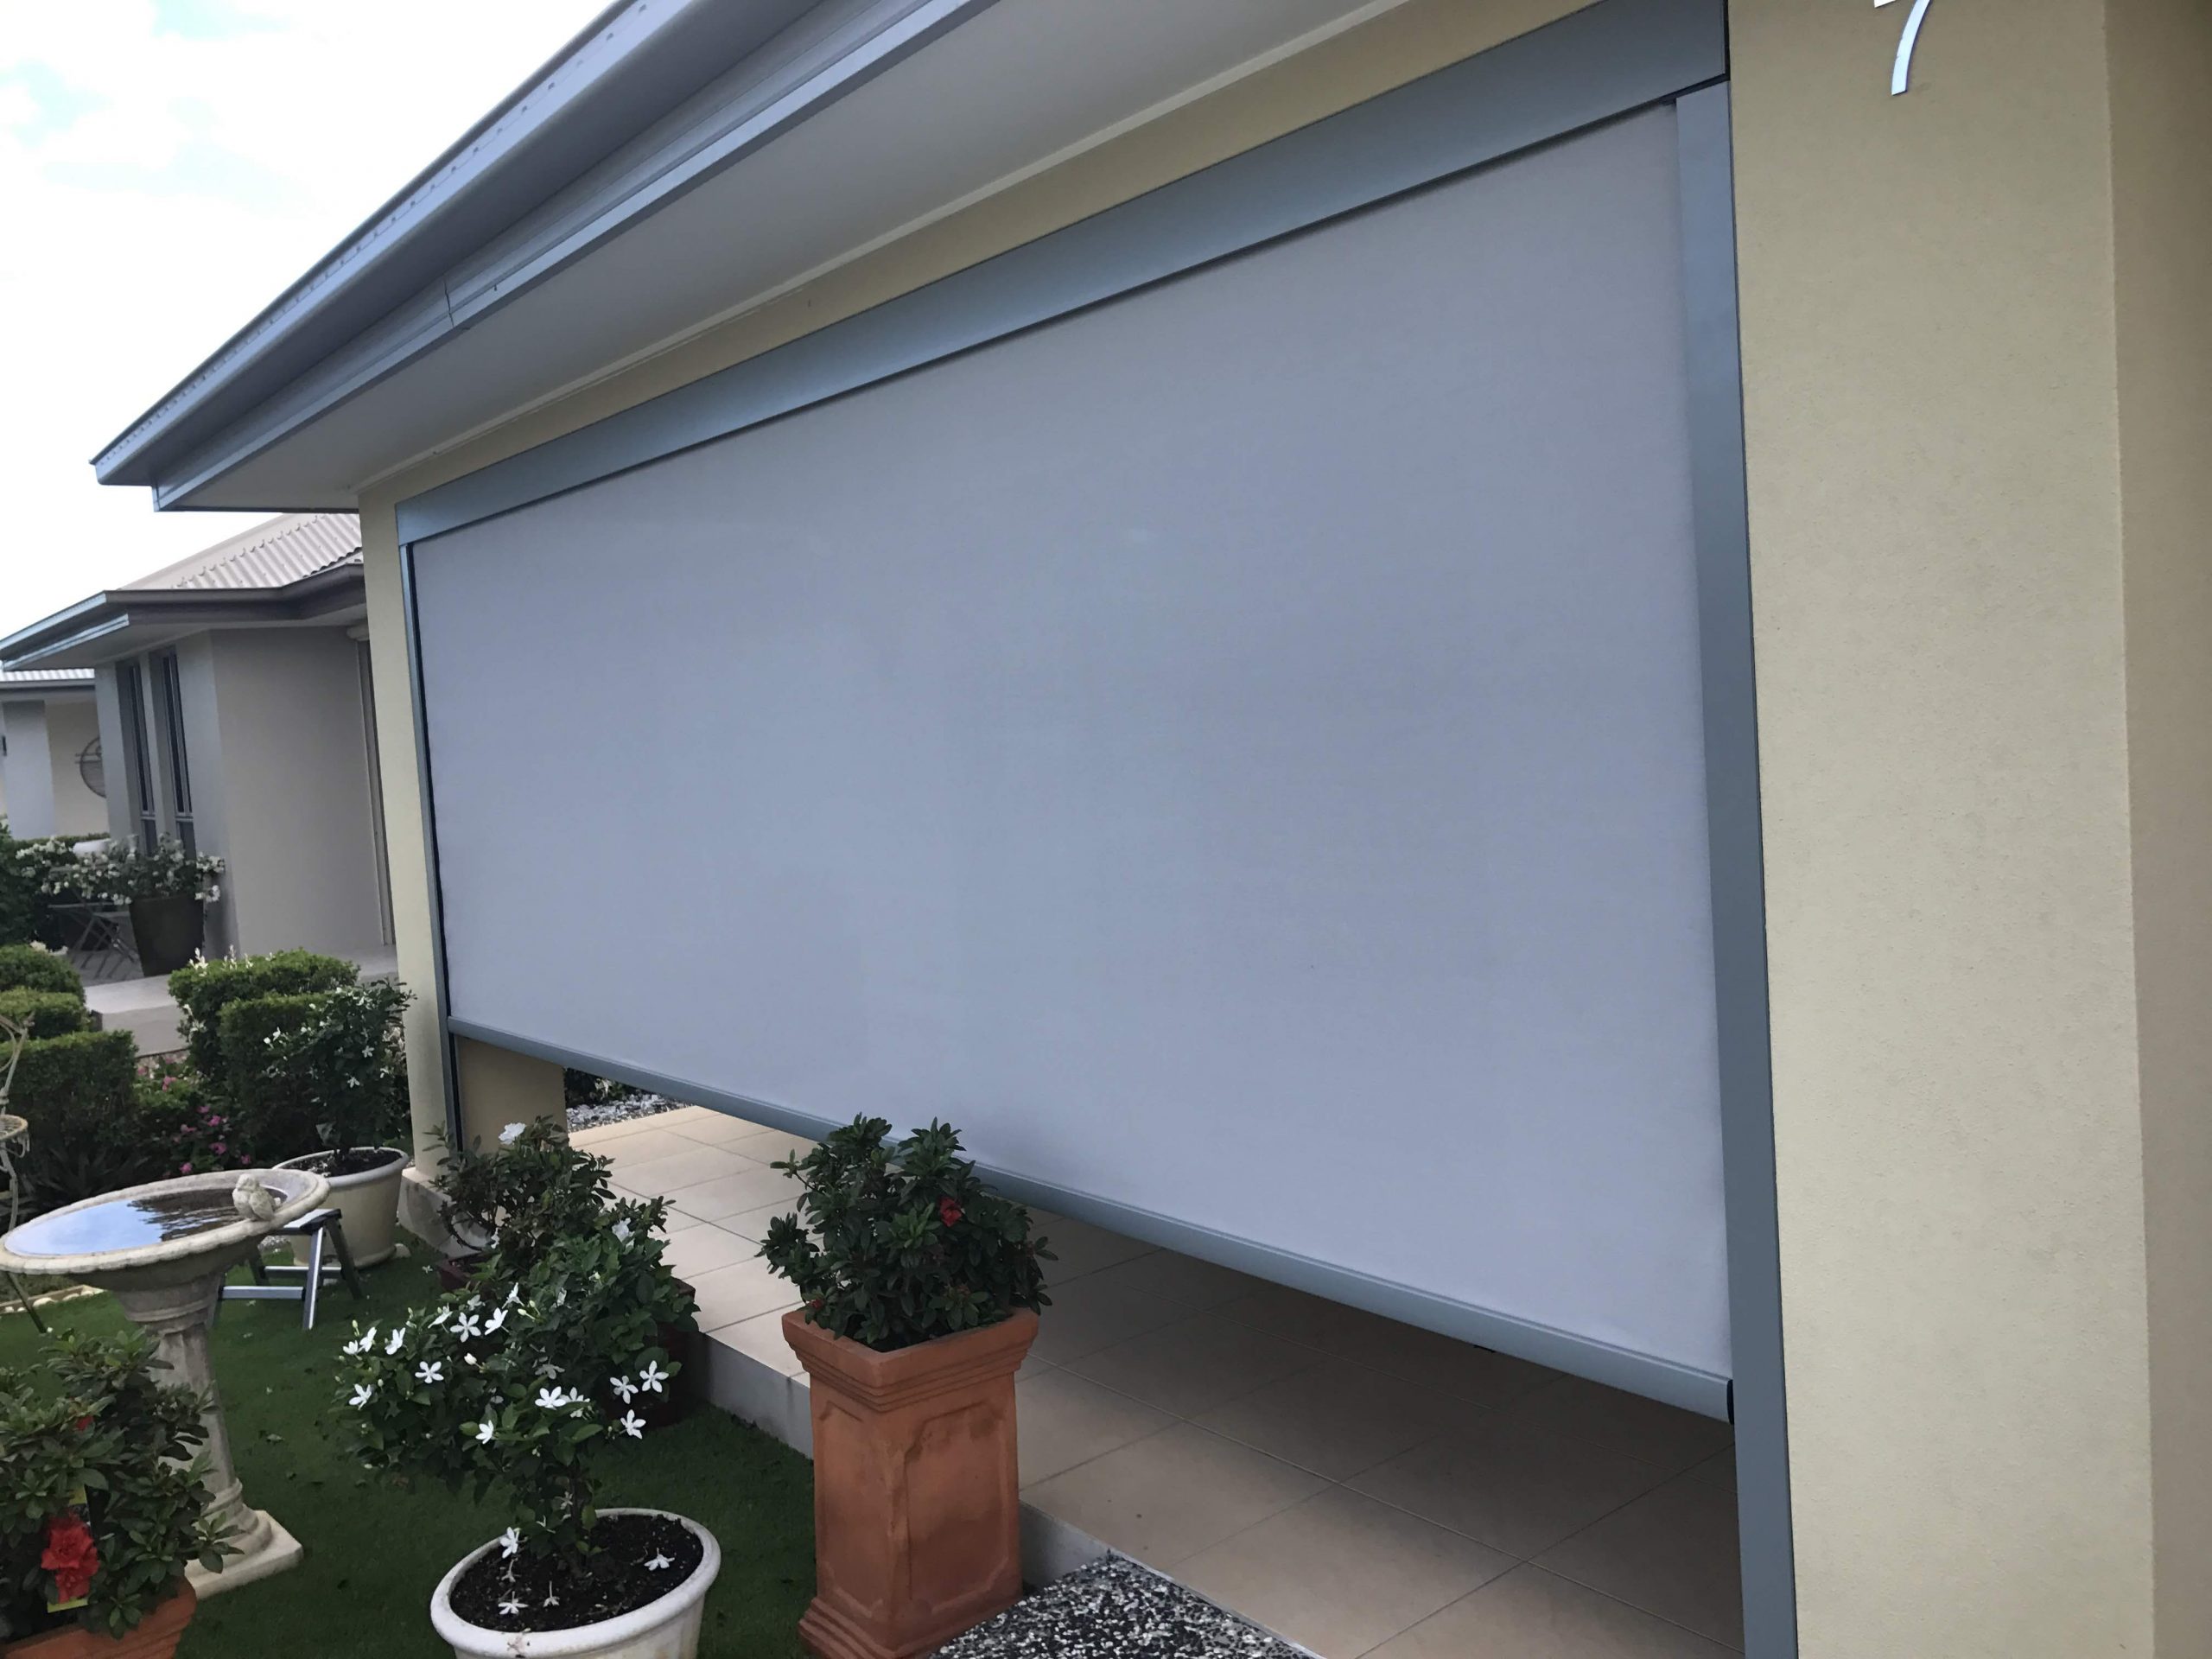 Beat the heat this summer. Find out how installing Ziptrak blinds can protect your Brisbane home from those super-hot days, and look stylish doing it, too!